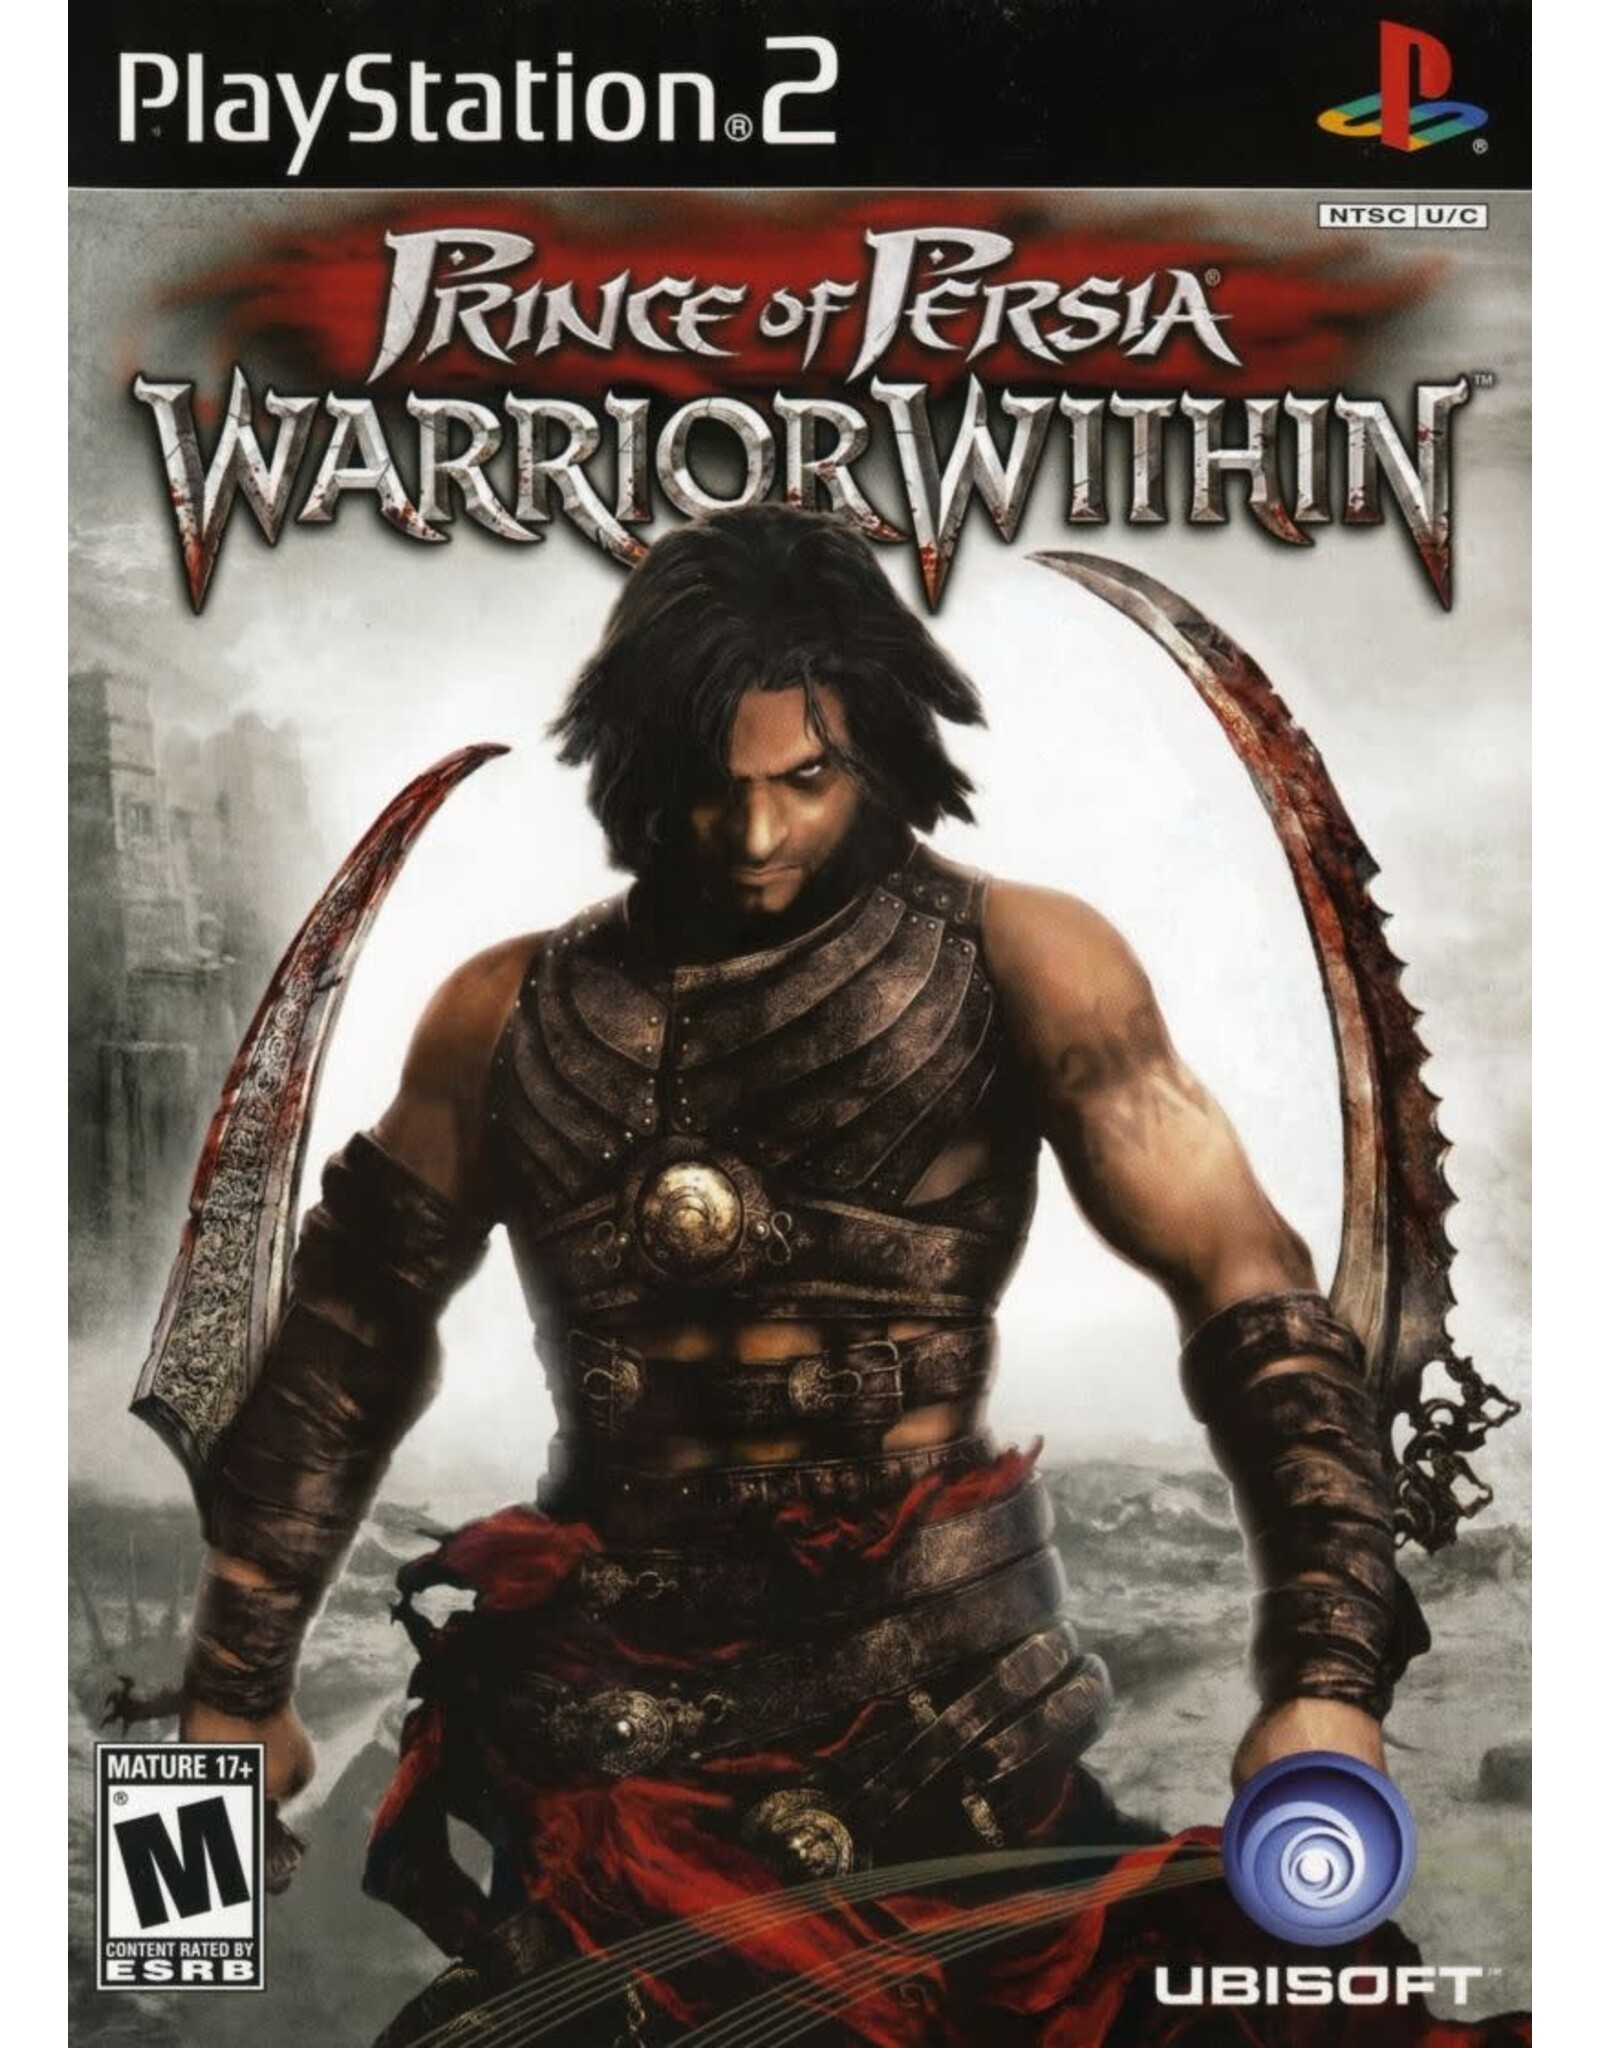 Playstation 2 Prince of Persia Warrior Within (CiB, Damaged Sleeve)